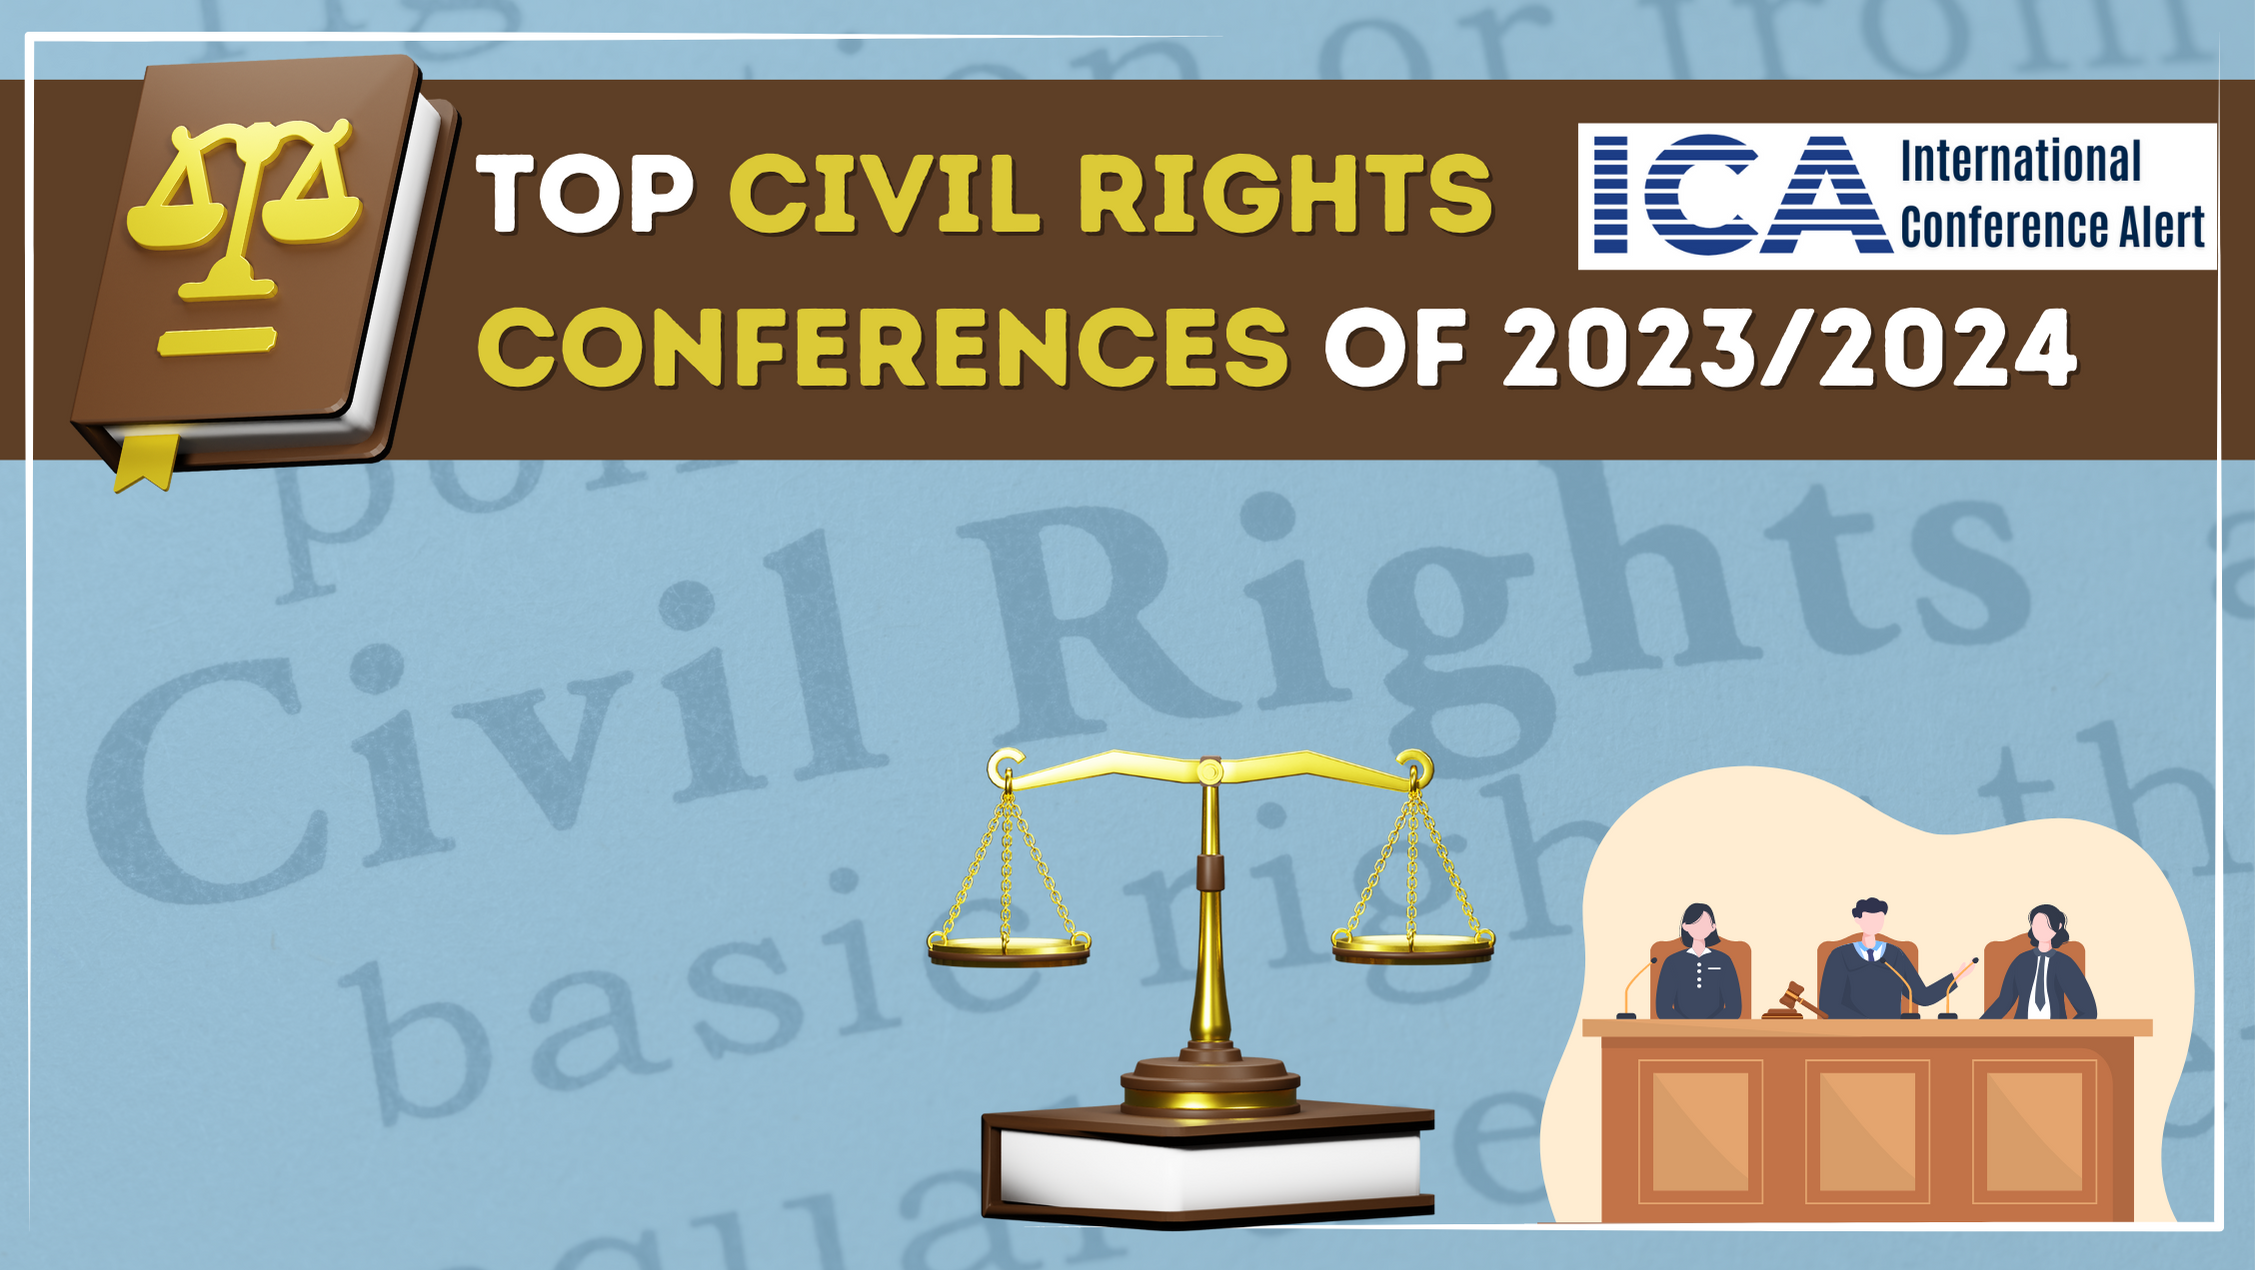 Top Civil Rights Conferences of 2023/2024